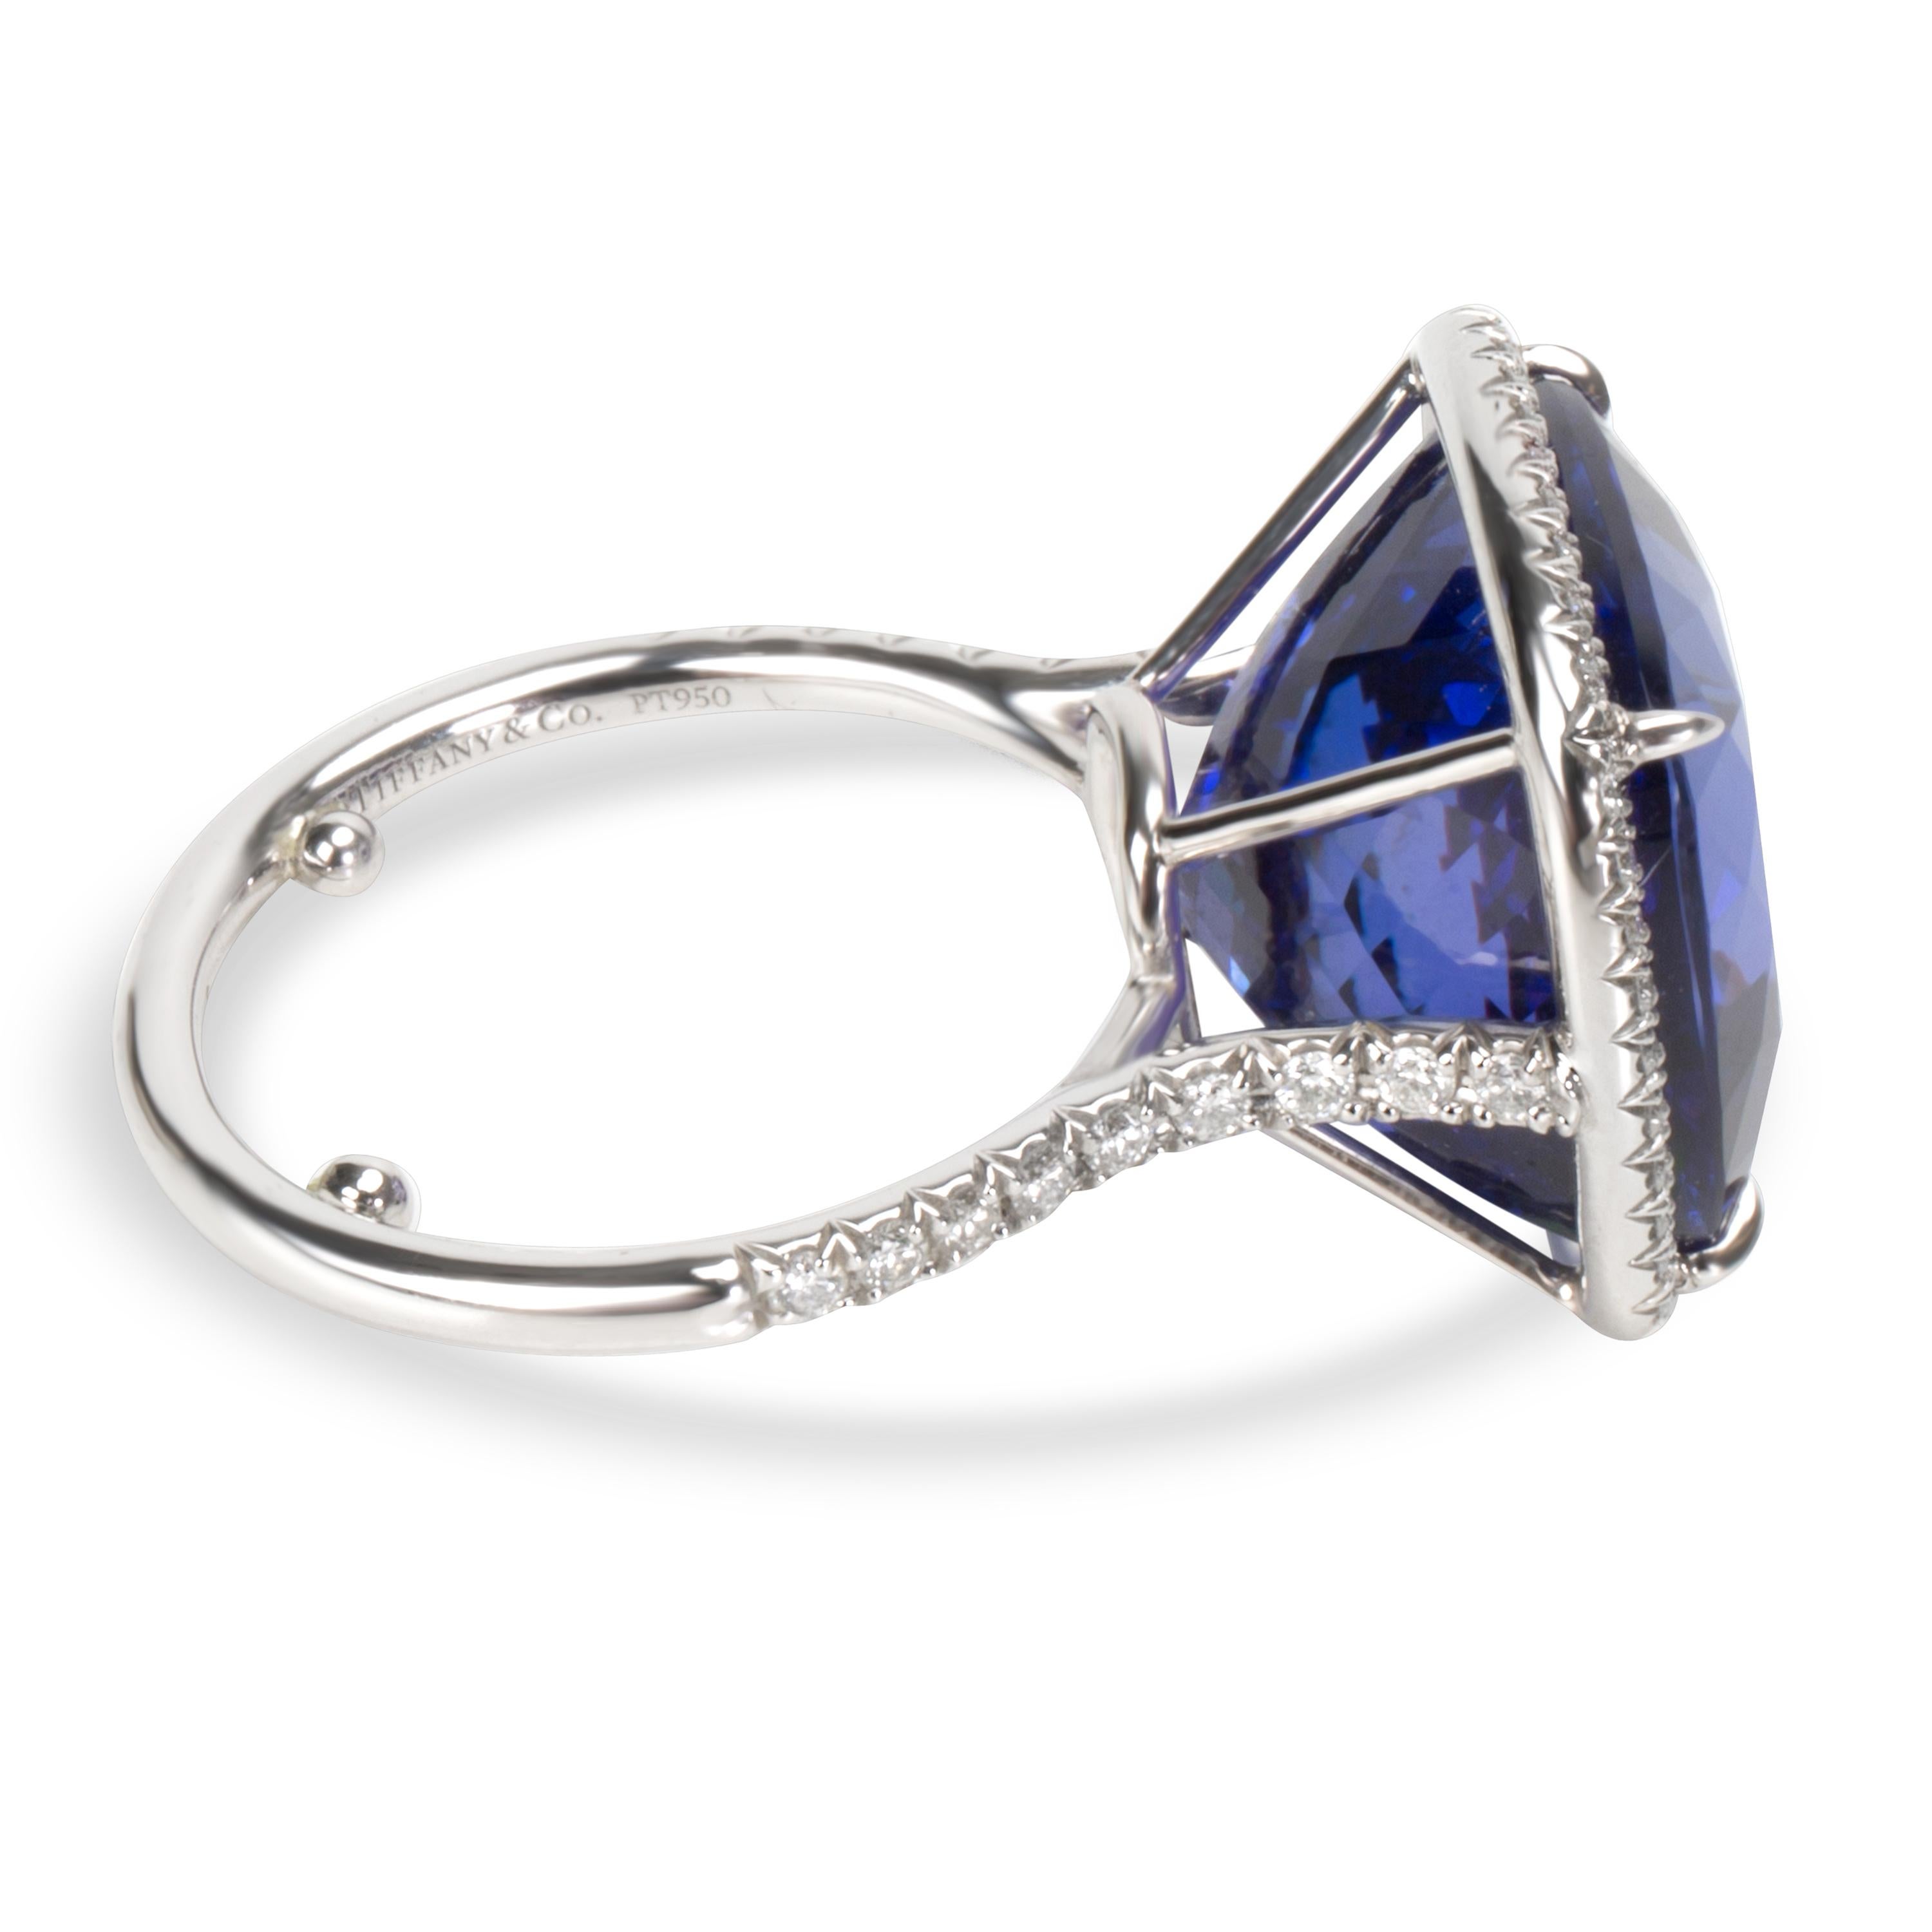 Tiffany & Co. Soleste Tanzanite & Diamond Halo Ring in Platinum 18.14 Carats
	
Retail price 35,000 USD. In excellent condition and recently polished. Comes with original box. Size 5 with sizing beads.

DETAILS

Shape: Cushiom
Carat Weight Center :